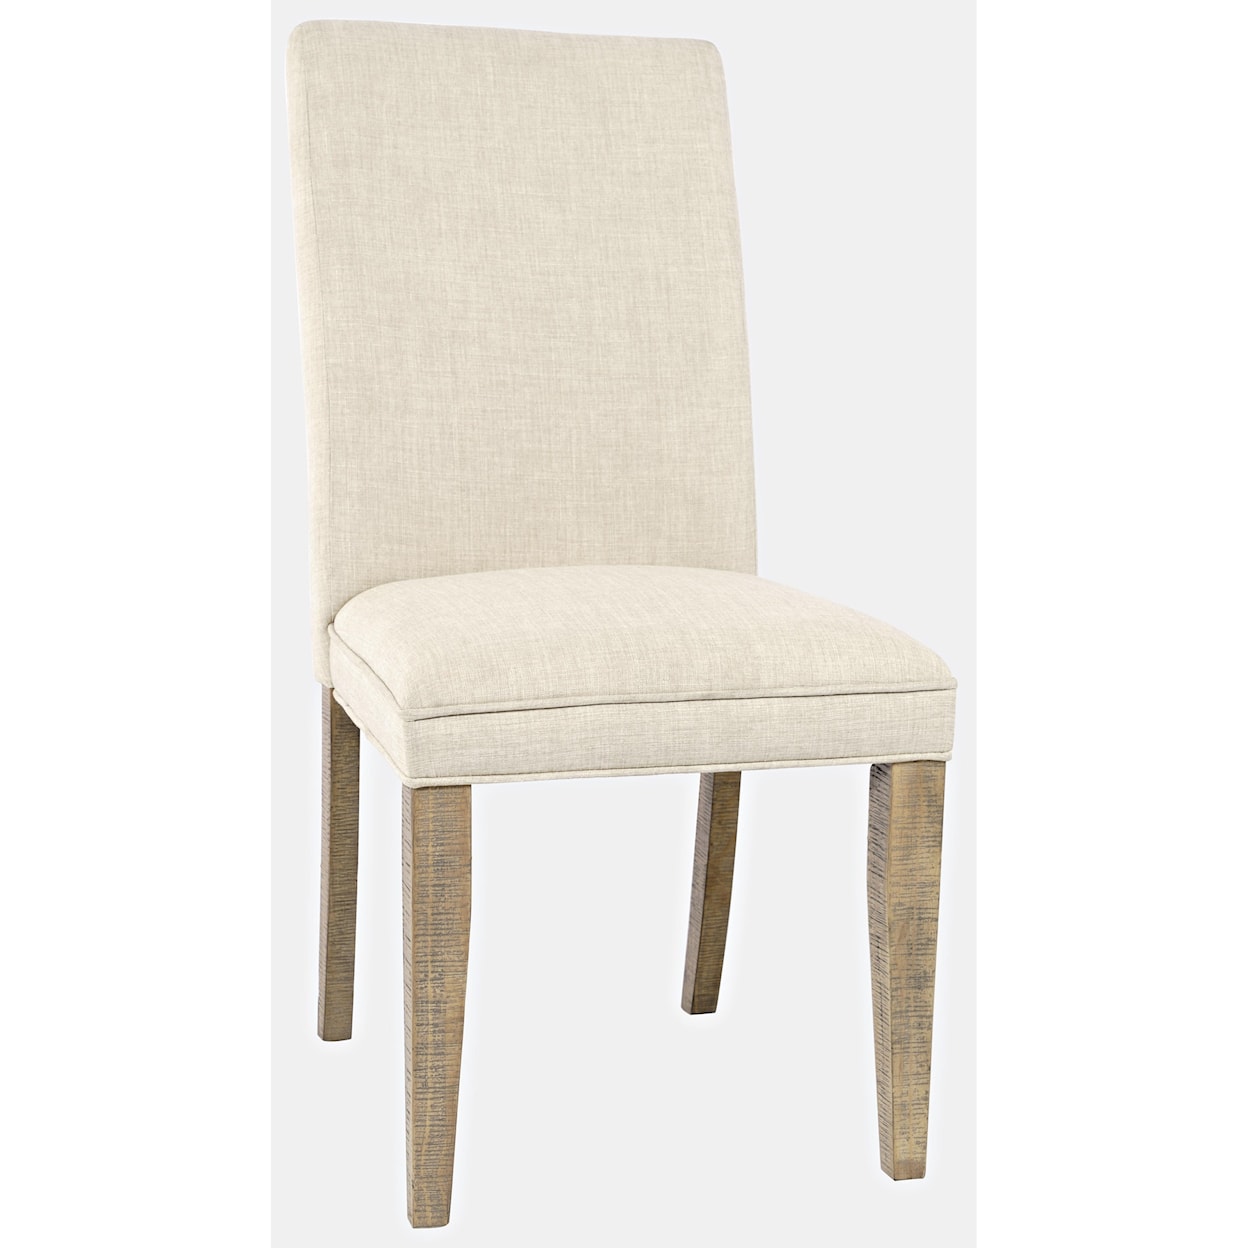 Jofran Carlyle Crossing Upholstered Chair